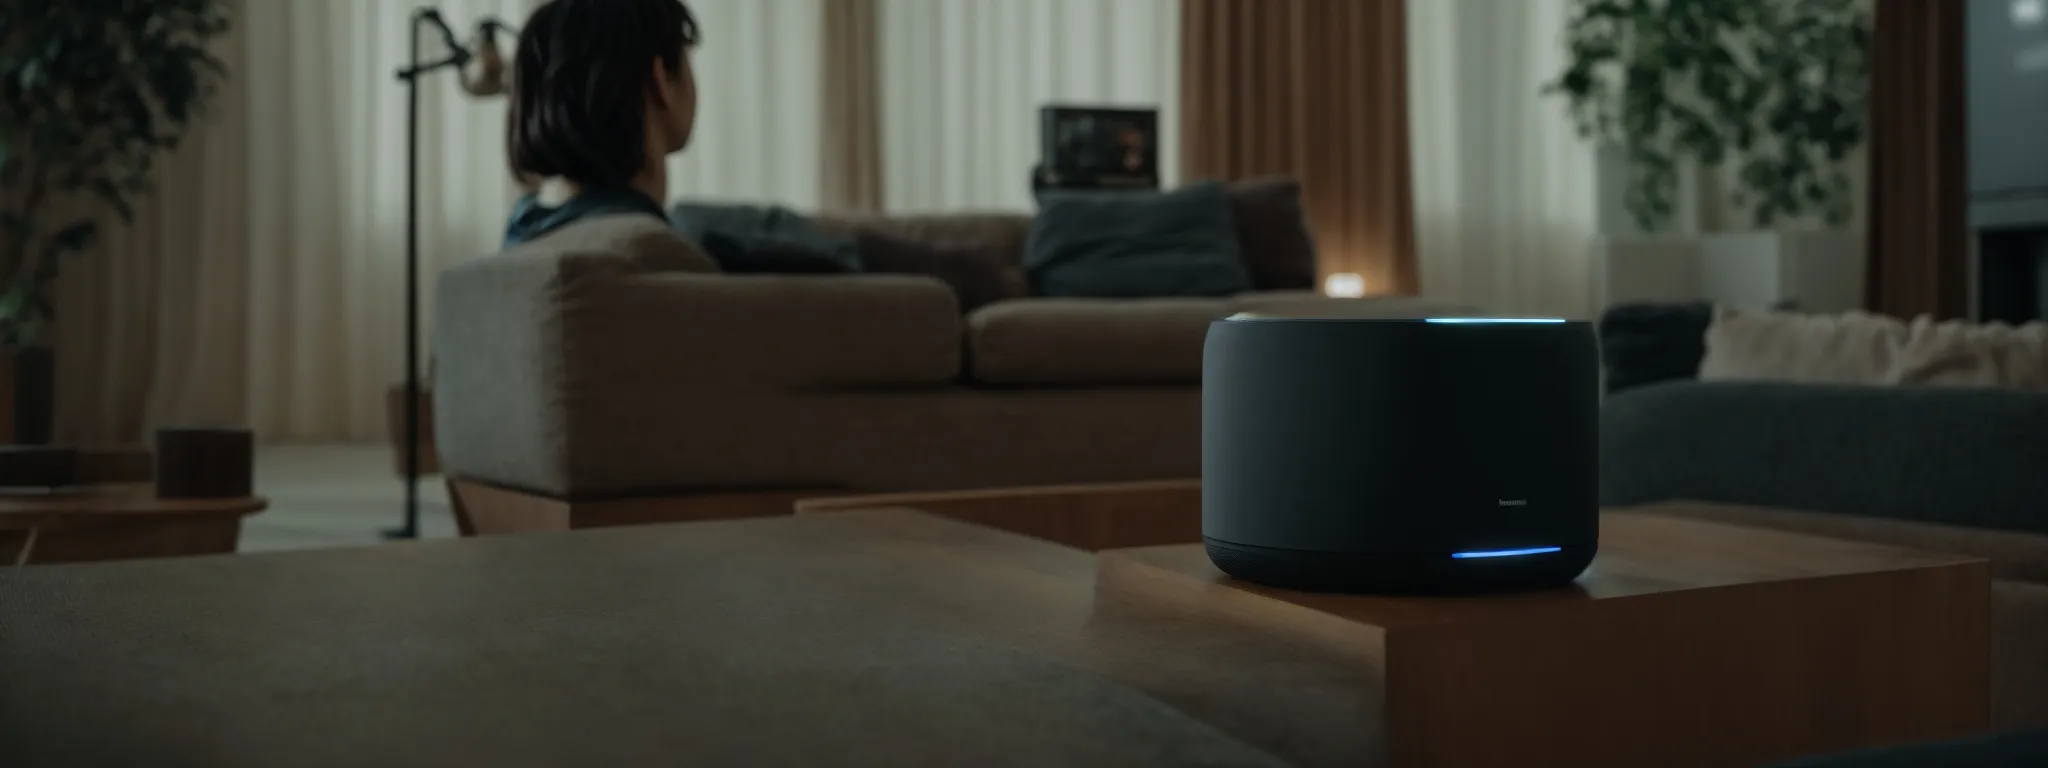 a person interacting with a smart speaker in a cozy living room.